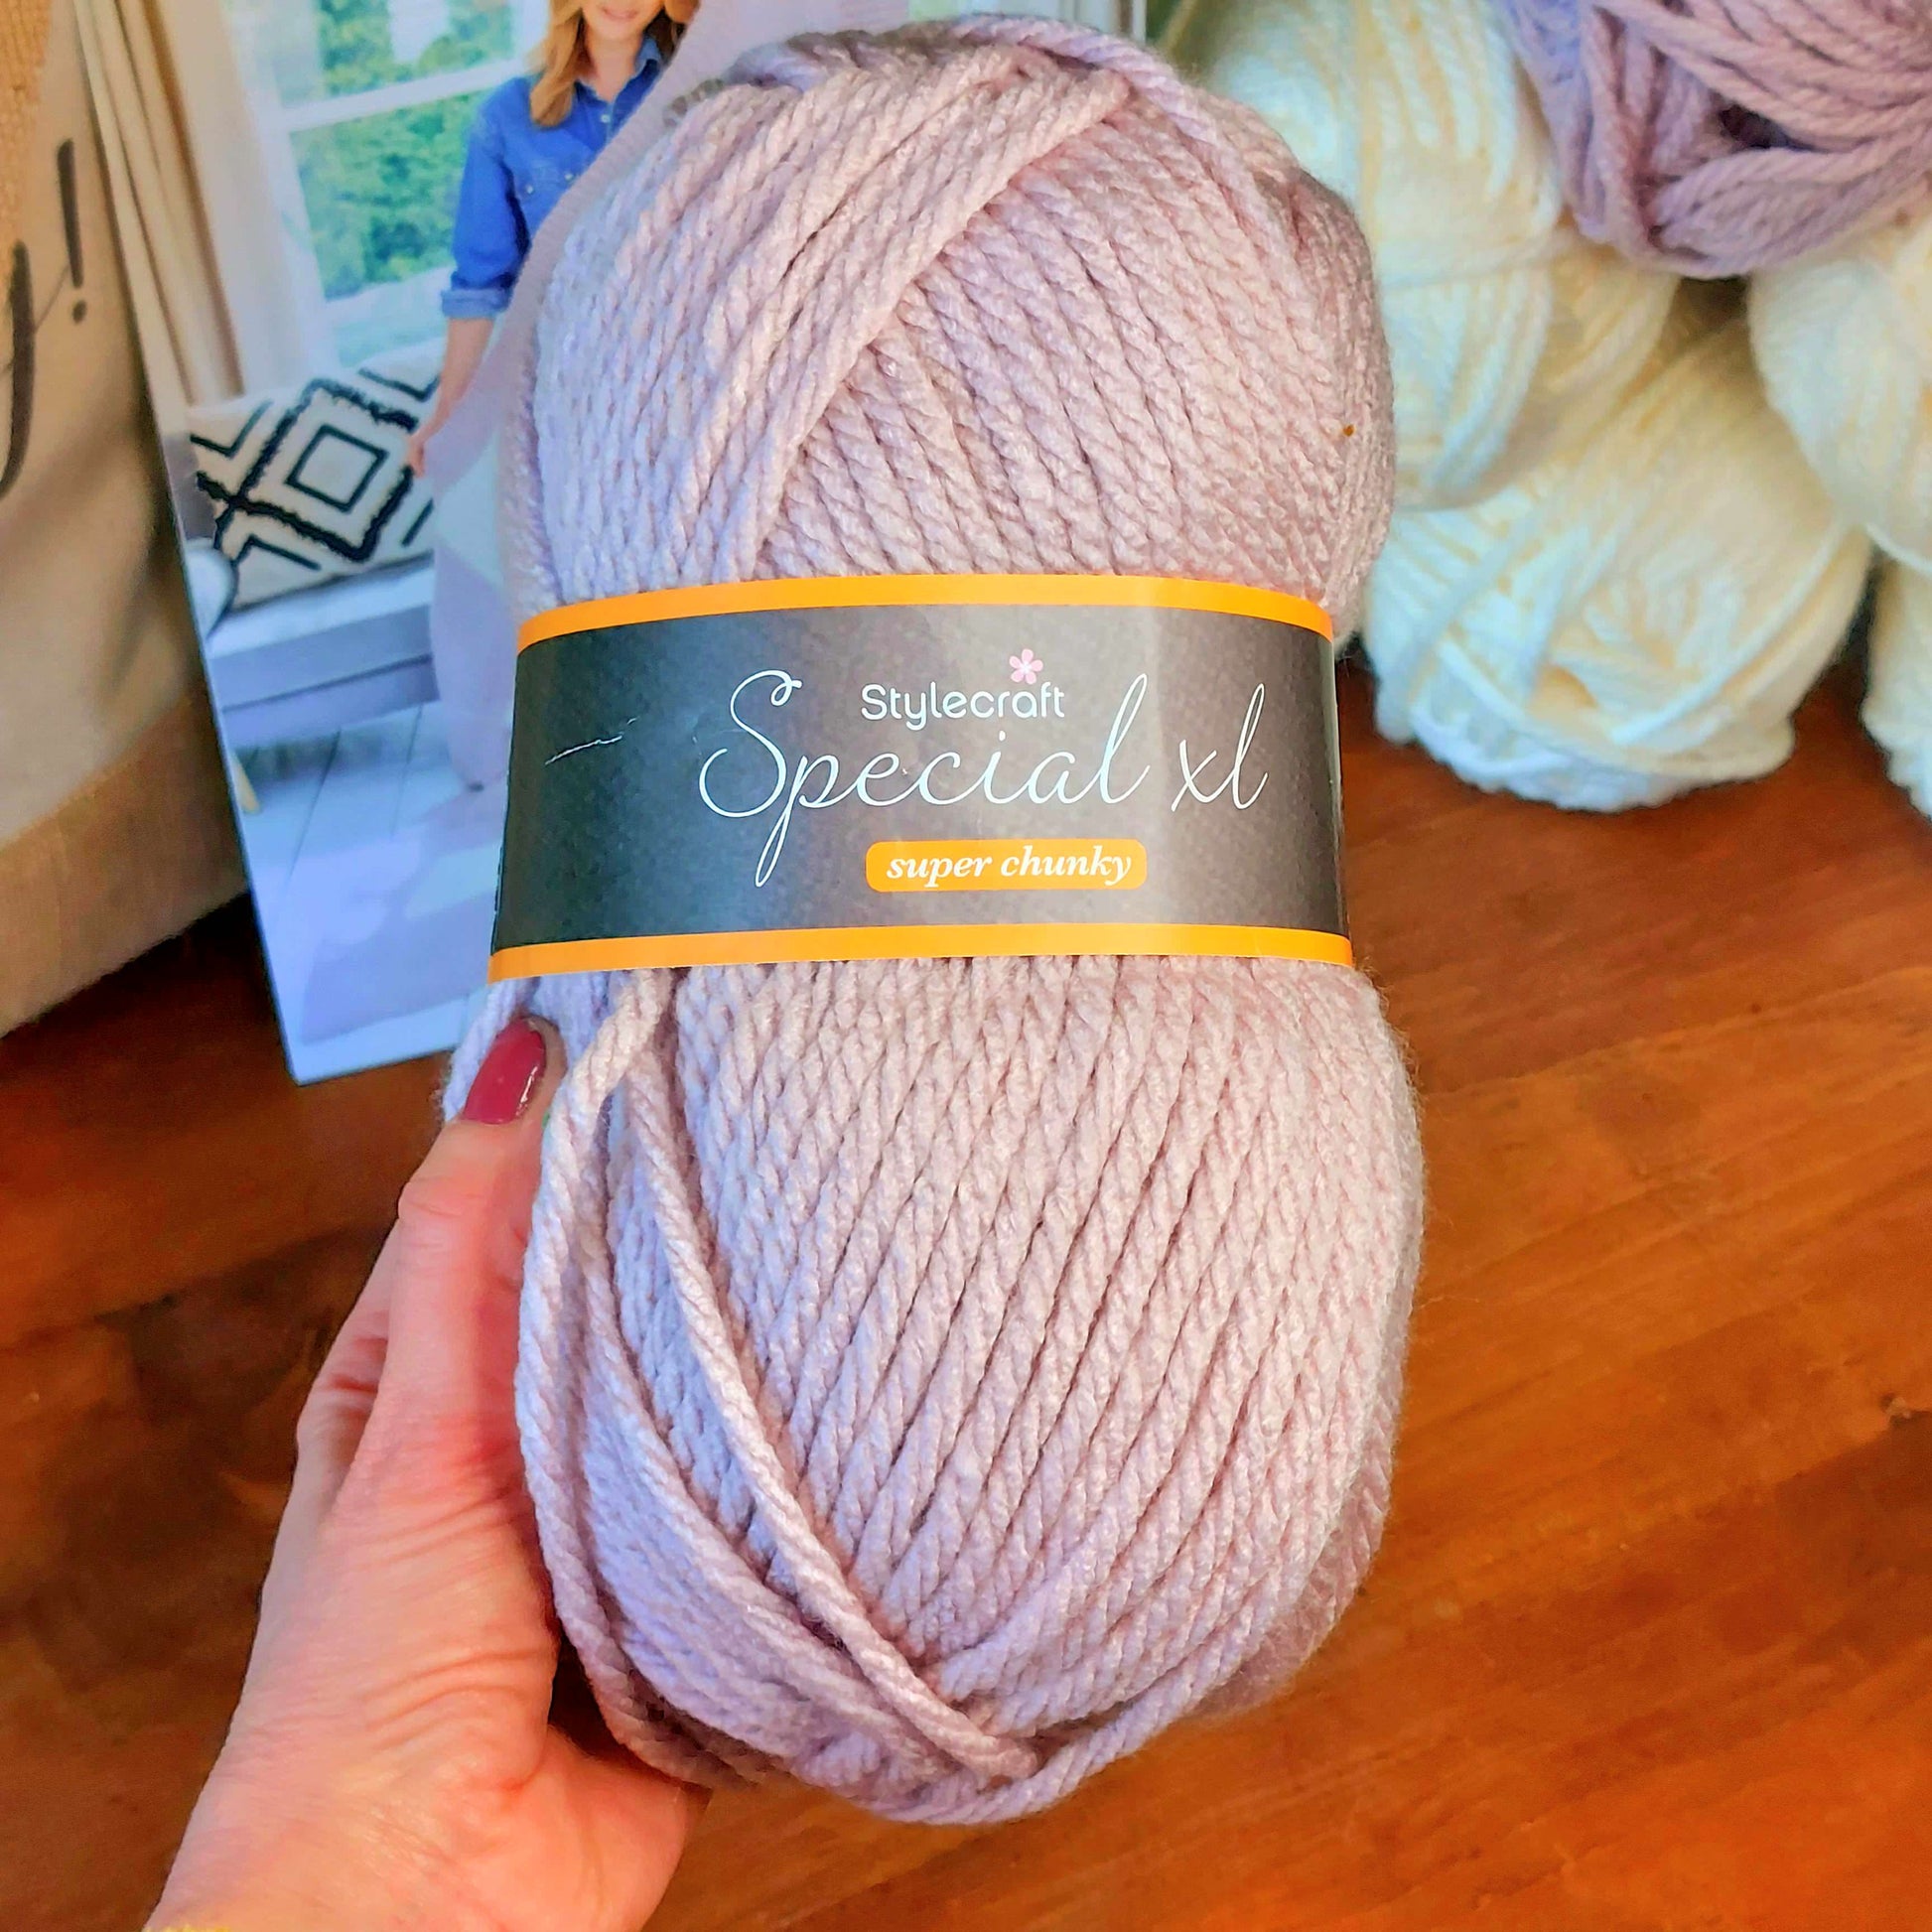 Lilac yarn held by woman's hand